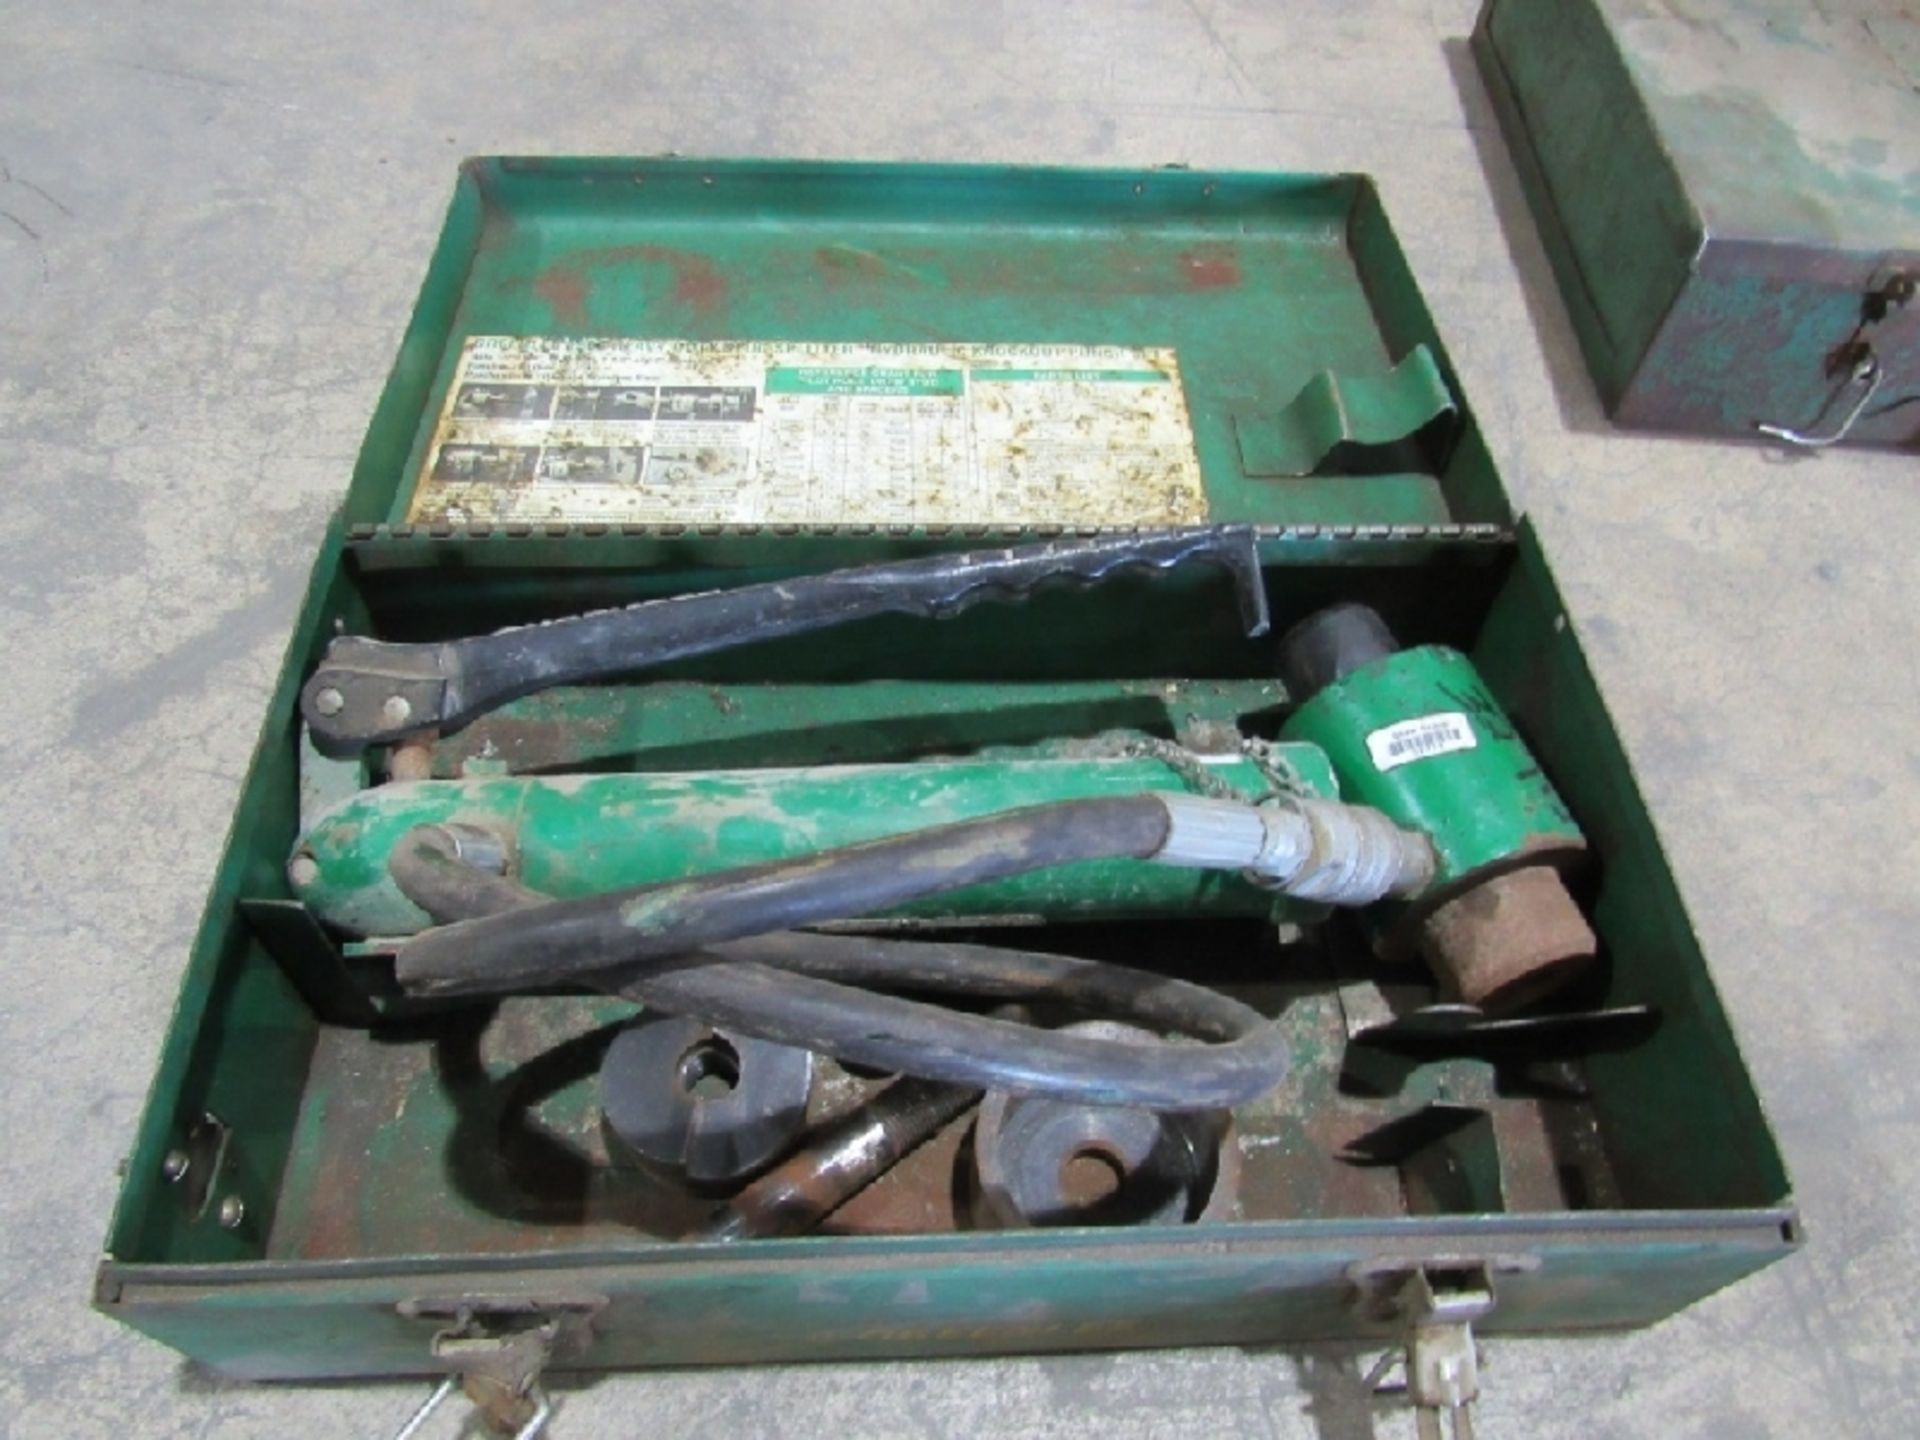 Greenlee Hydraulic Knockout Punch Set- ***Located in Chattanooga, TN*** MFR - Greenlee Model -